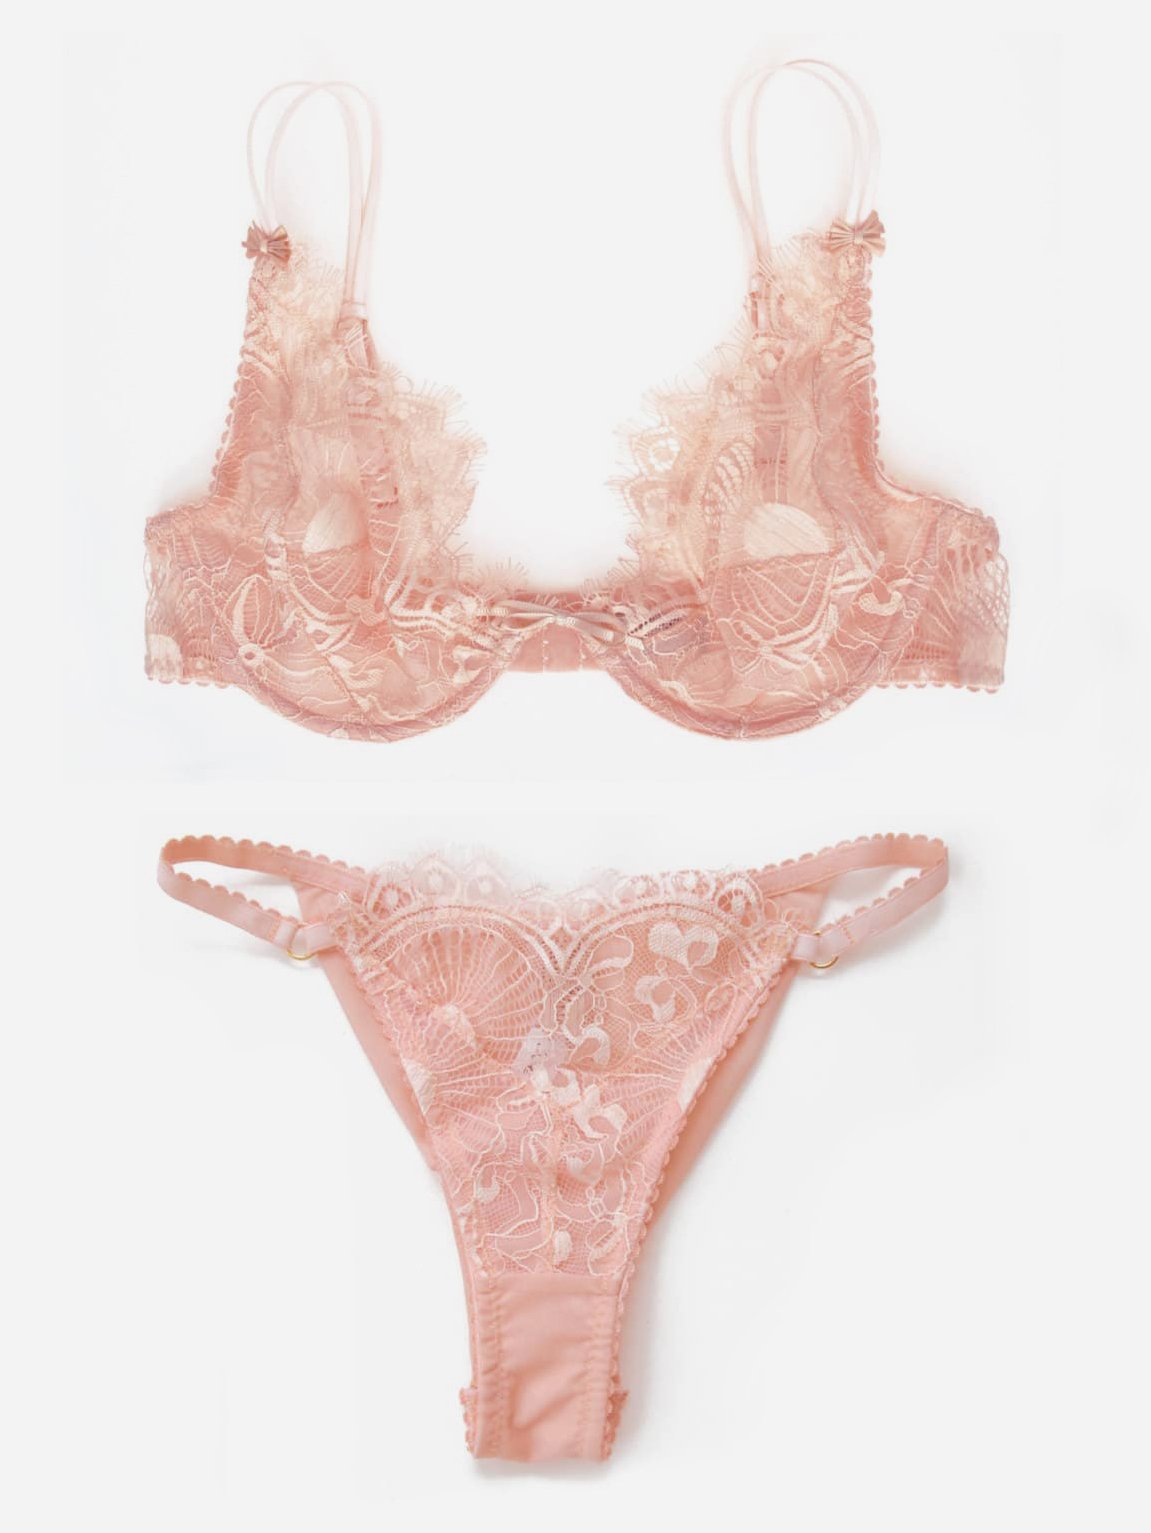 Pink Lace lingerie: Lace bra and tanga in powder pink - Made to measure